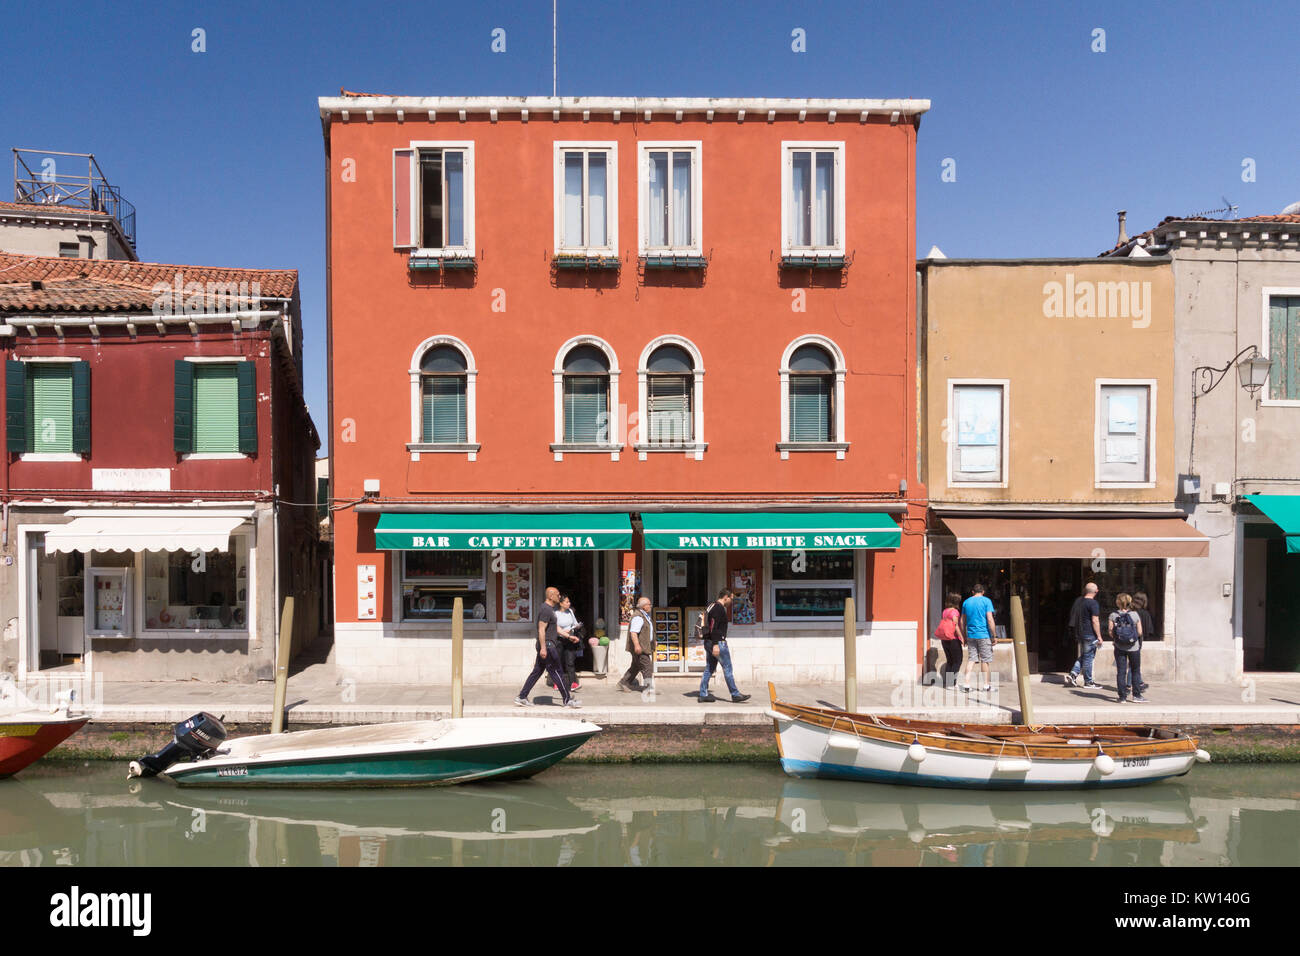 Tourists walking past a brightly coloured bar and cafe on the island of Murano, Venice Stock Photo